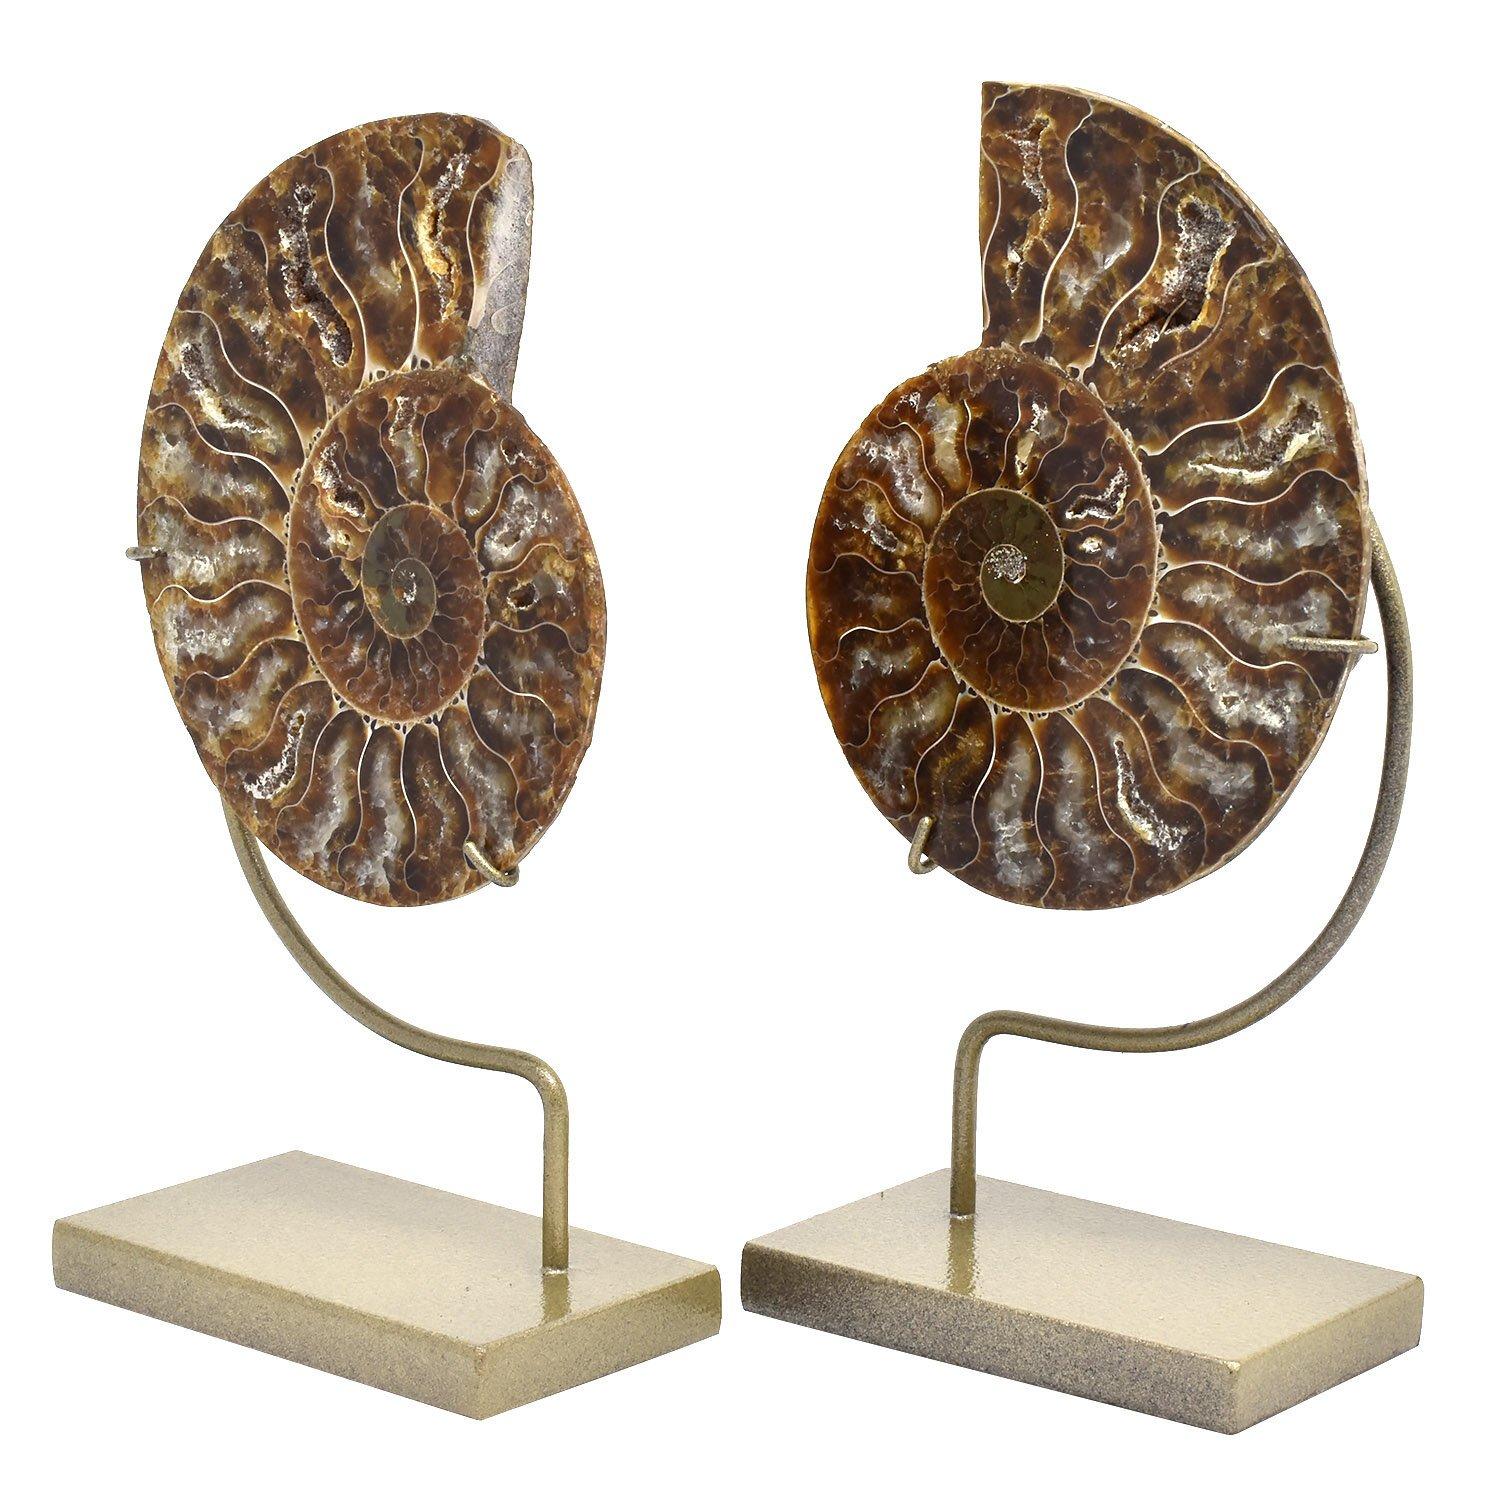 Matched Pair Split Ammonite fossil mineral specimens

Jurassic - Cretaceous Period, 200 - 145 million years old
Measures: 4 x 3.25 x 0.25 in. / 10 x 8 x 1 cm
Height on custom display stands: 6.25 in. / 16 cm

An excellent quality split